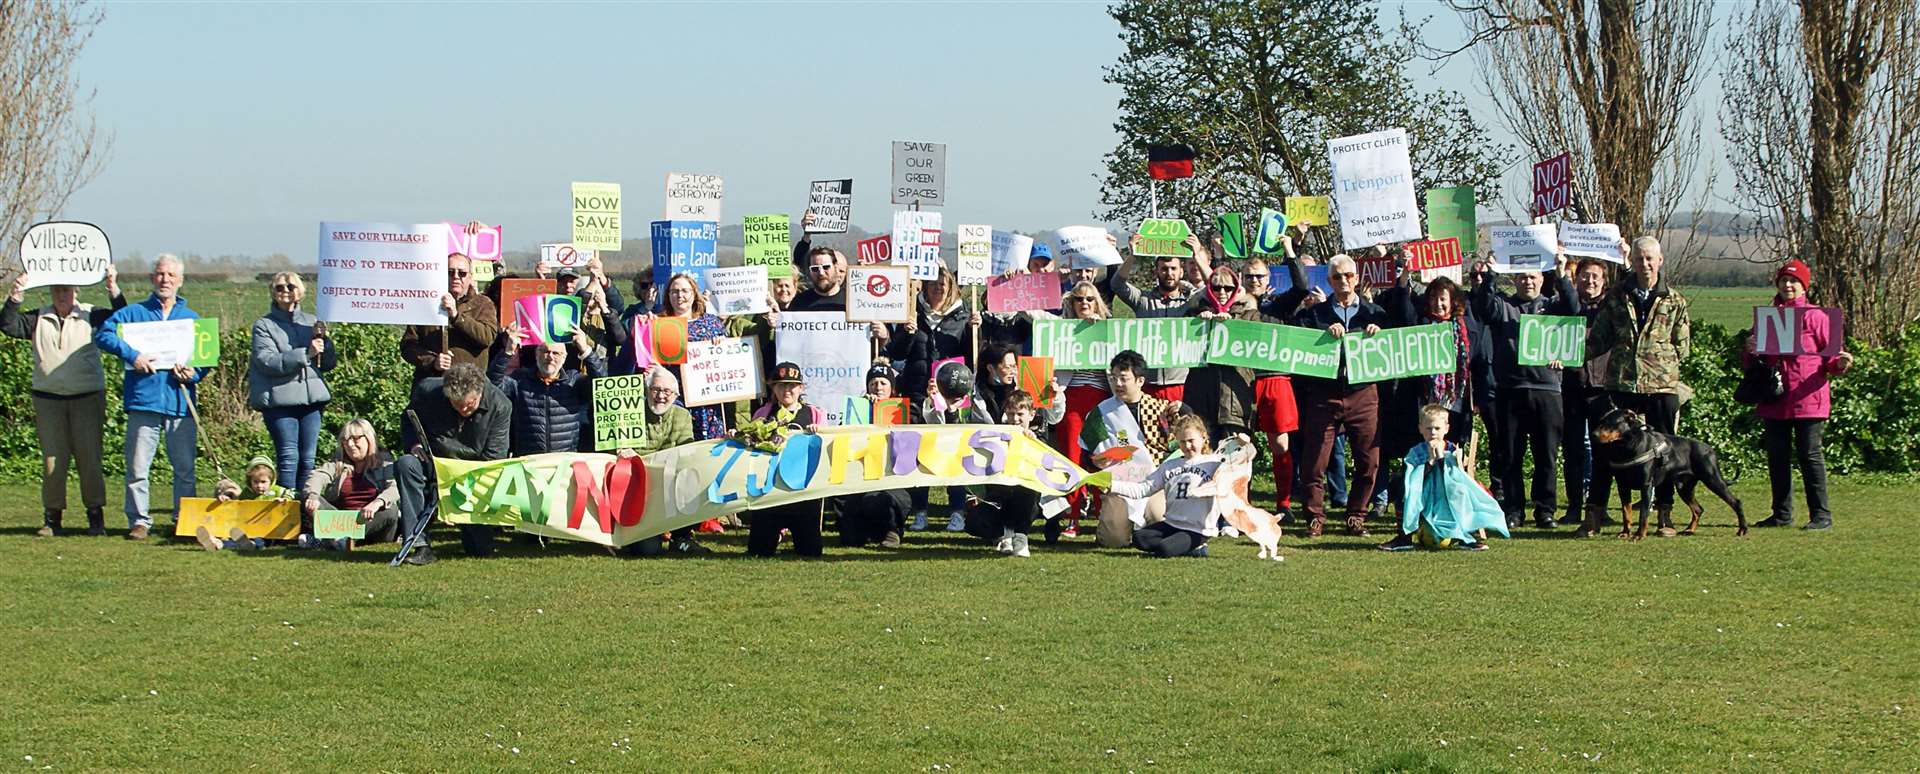 Campaigners in Cliffe protesting the homes plan